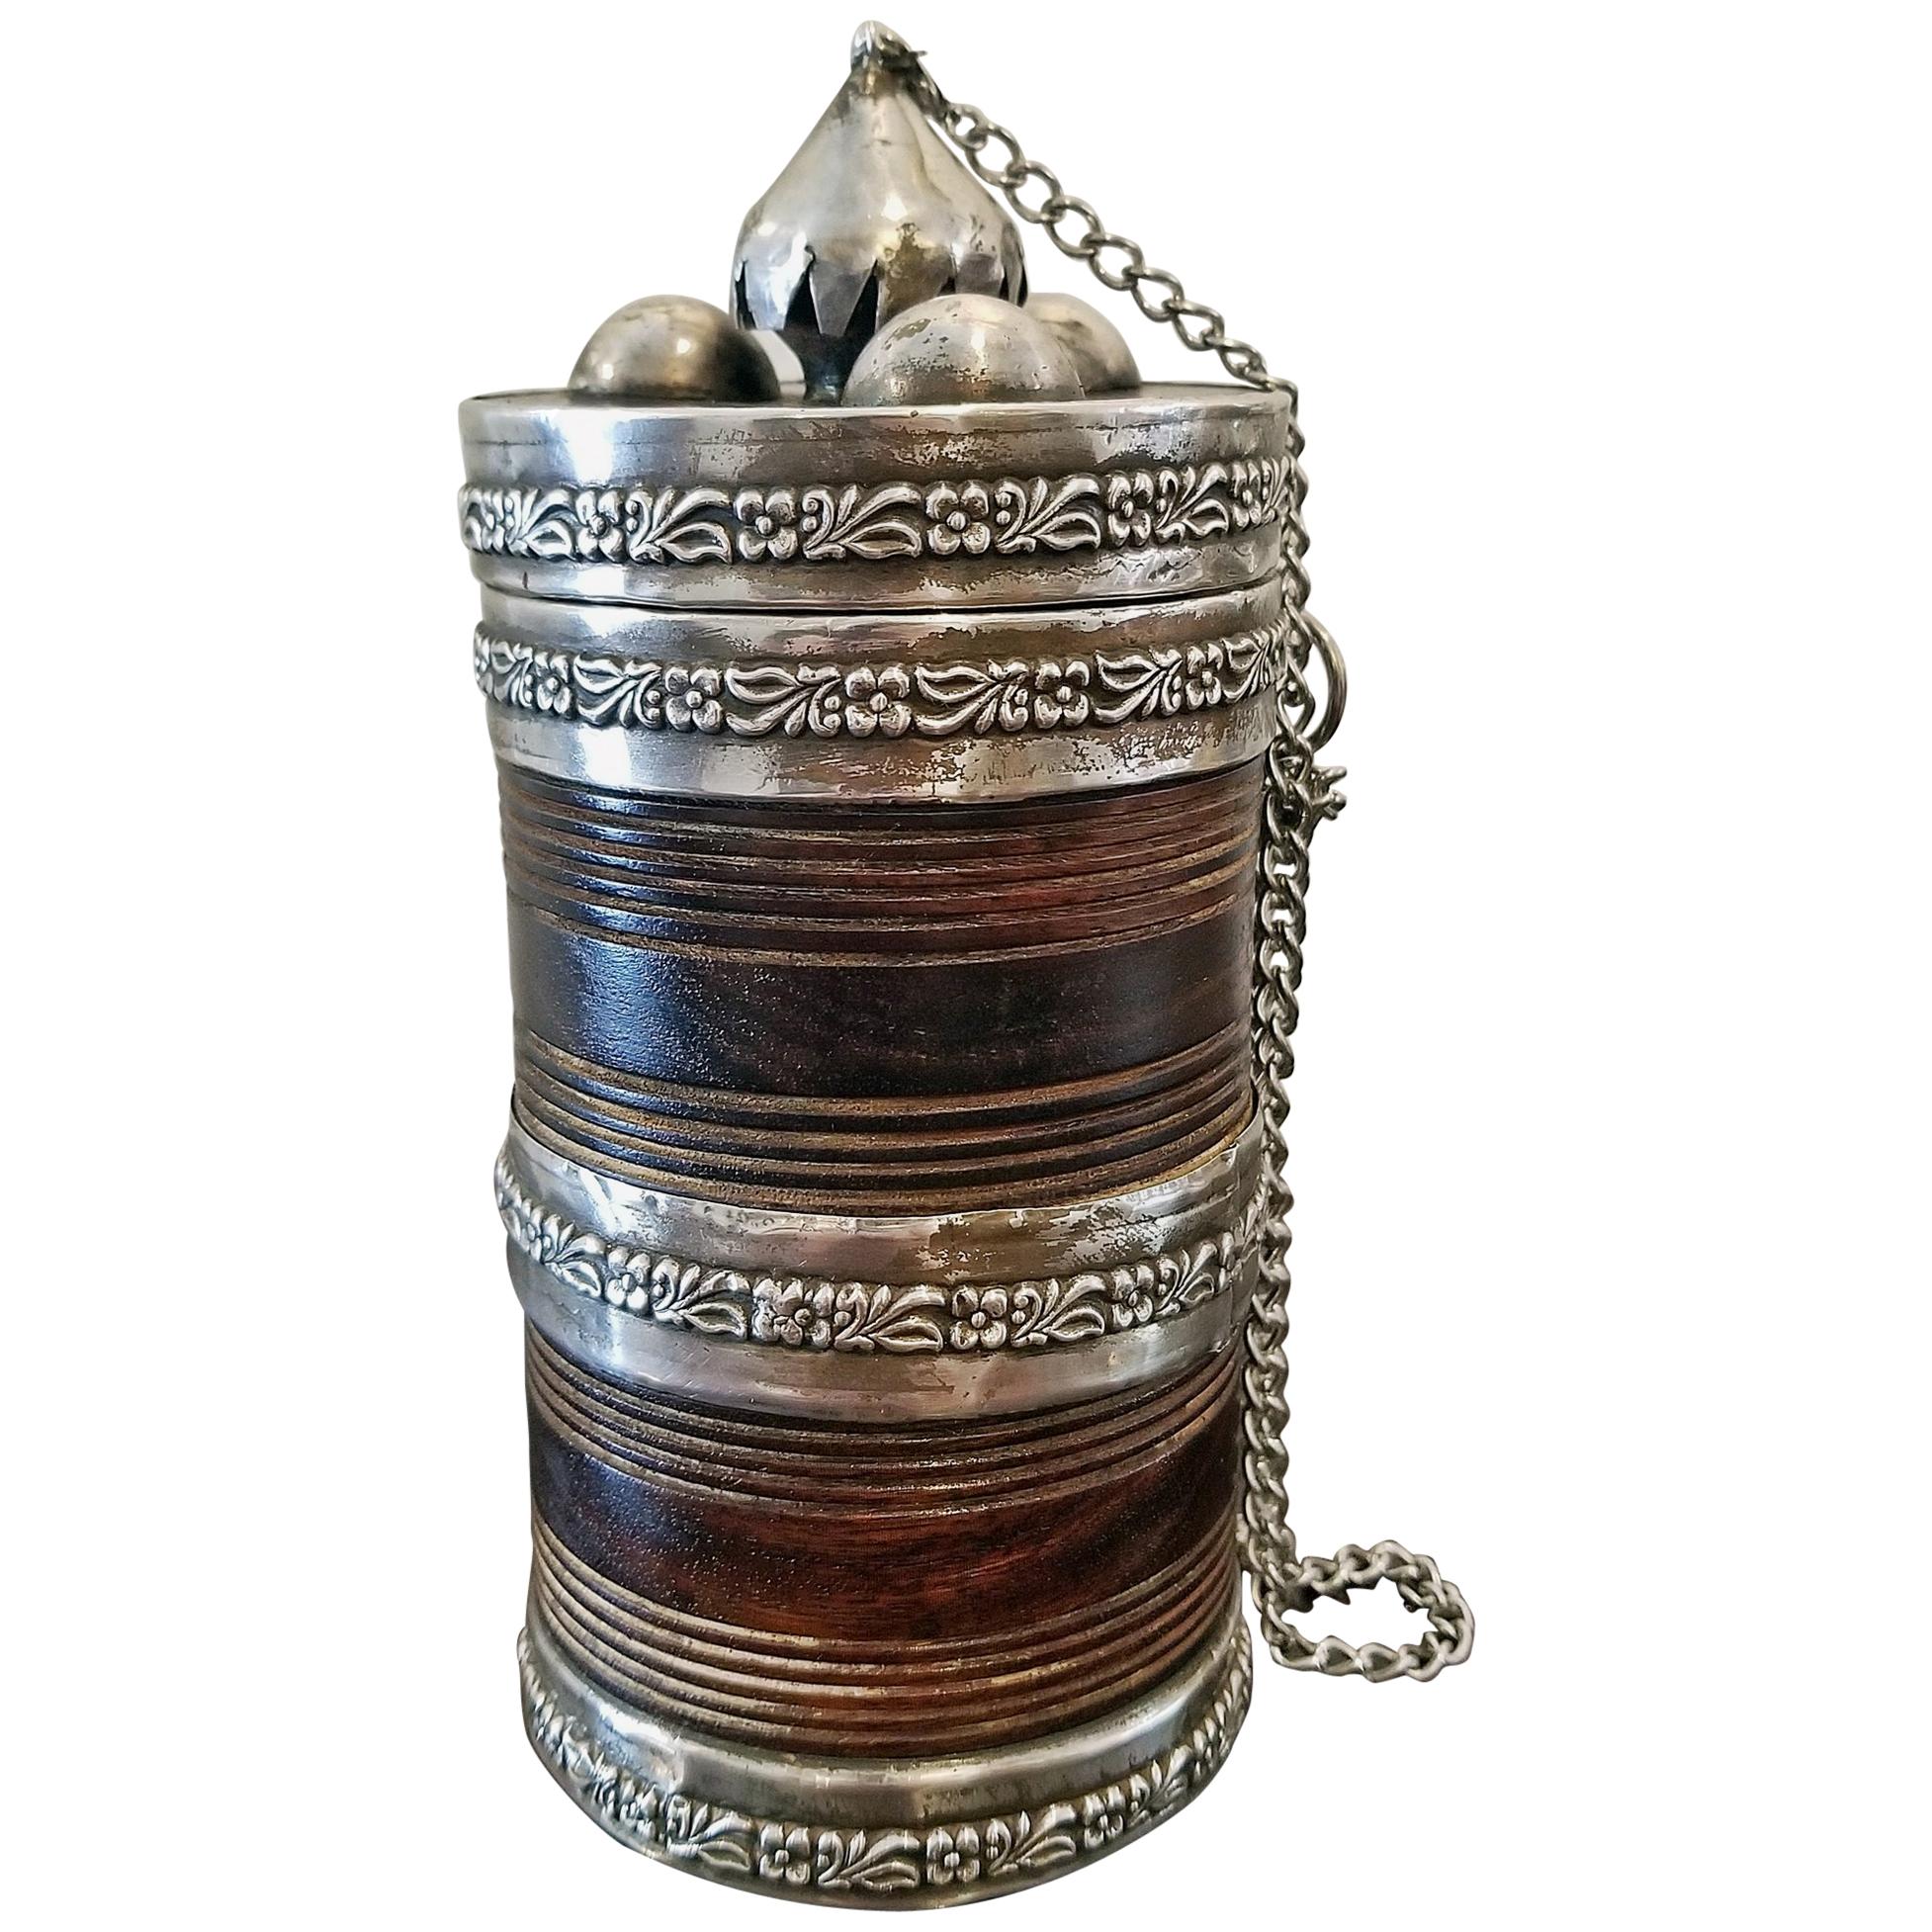 19th Century Anglo-Indian Spice or Tea Caddy with Silver Mounts